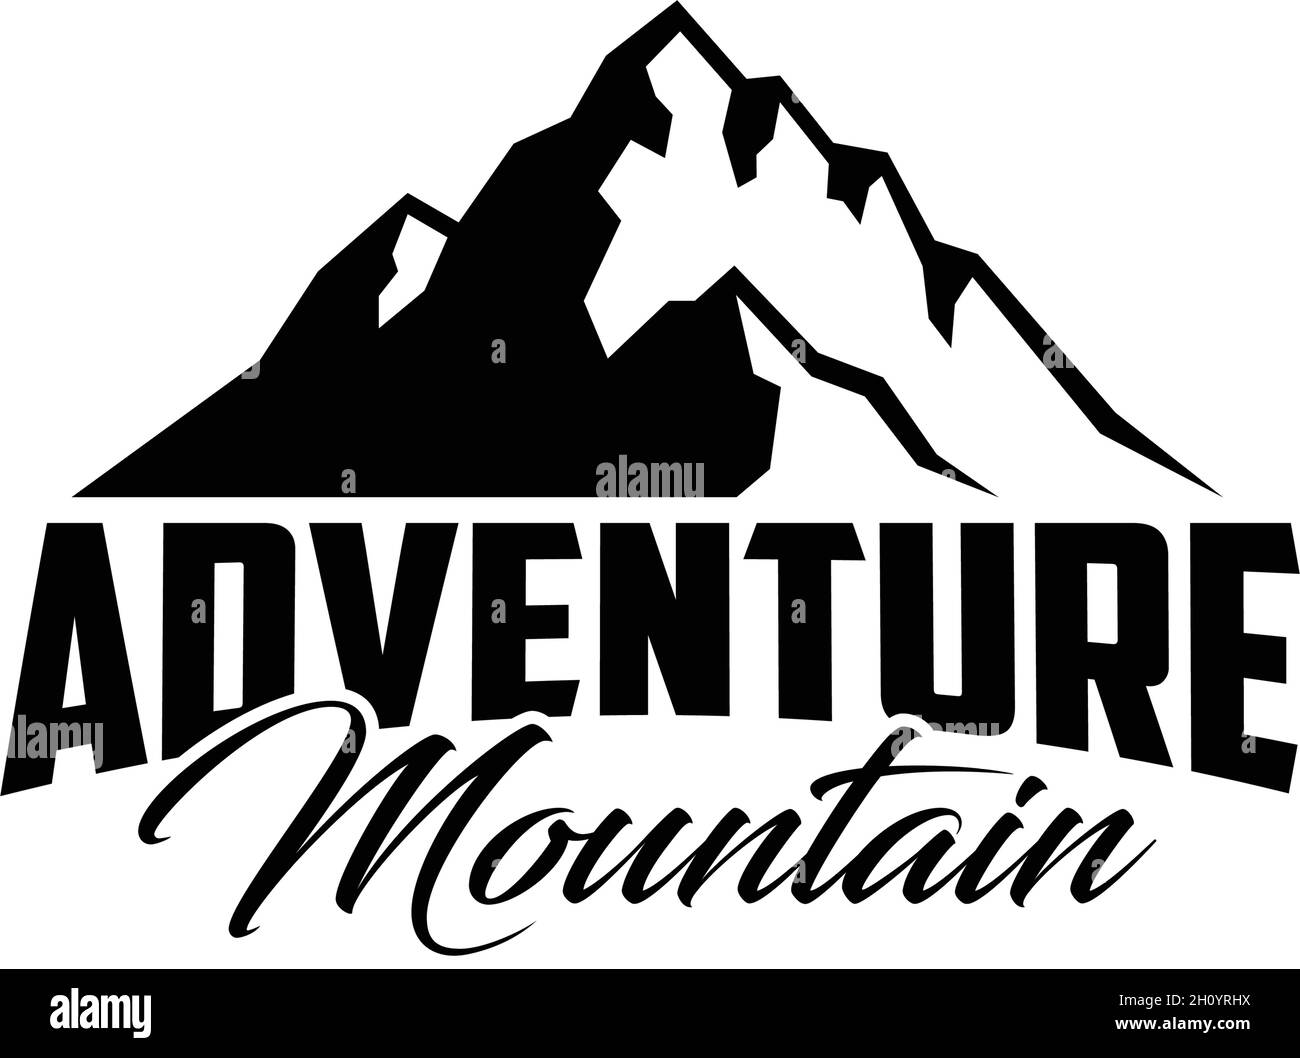 Mountain illustration with text 'Adventure Mountain', logo design related to outdoor activity Stock Vector